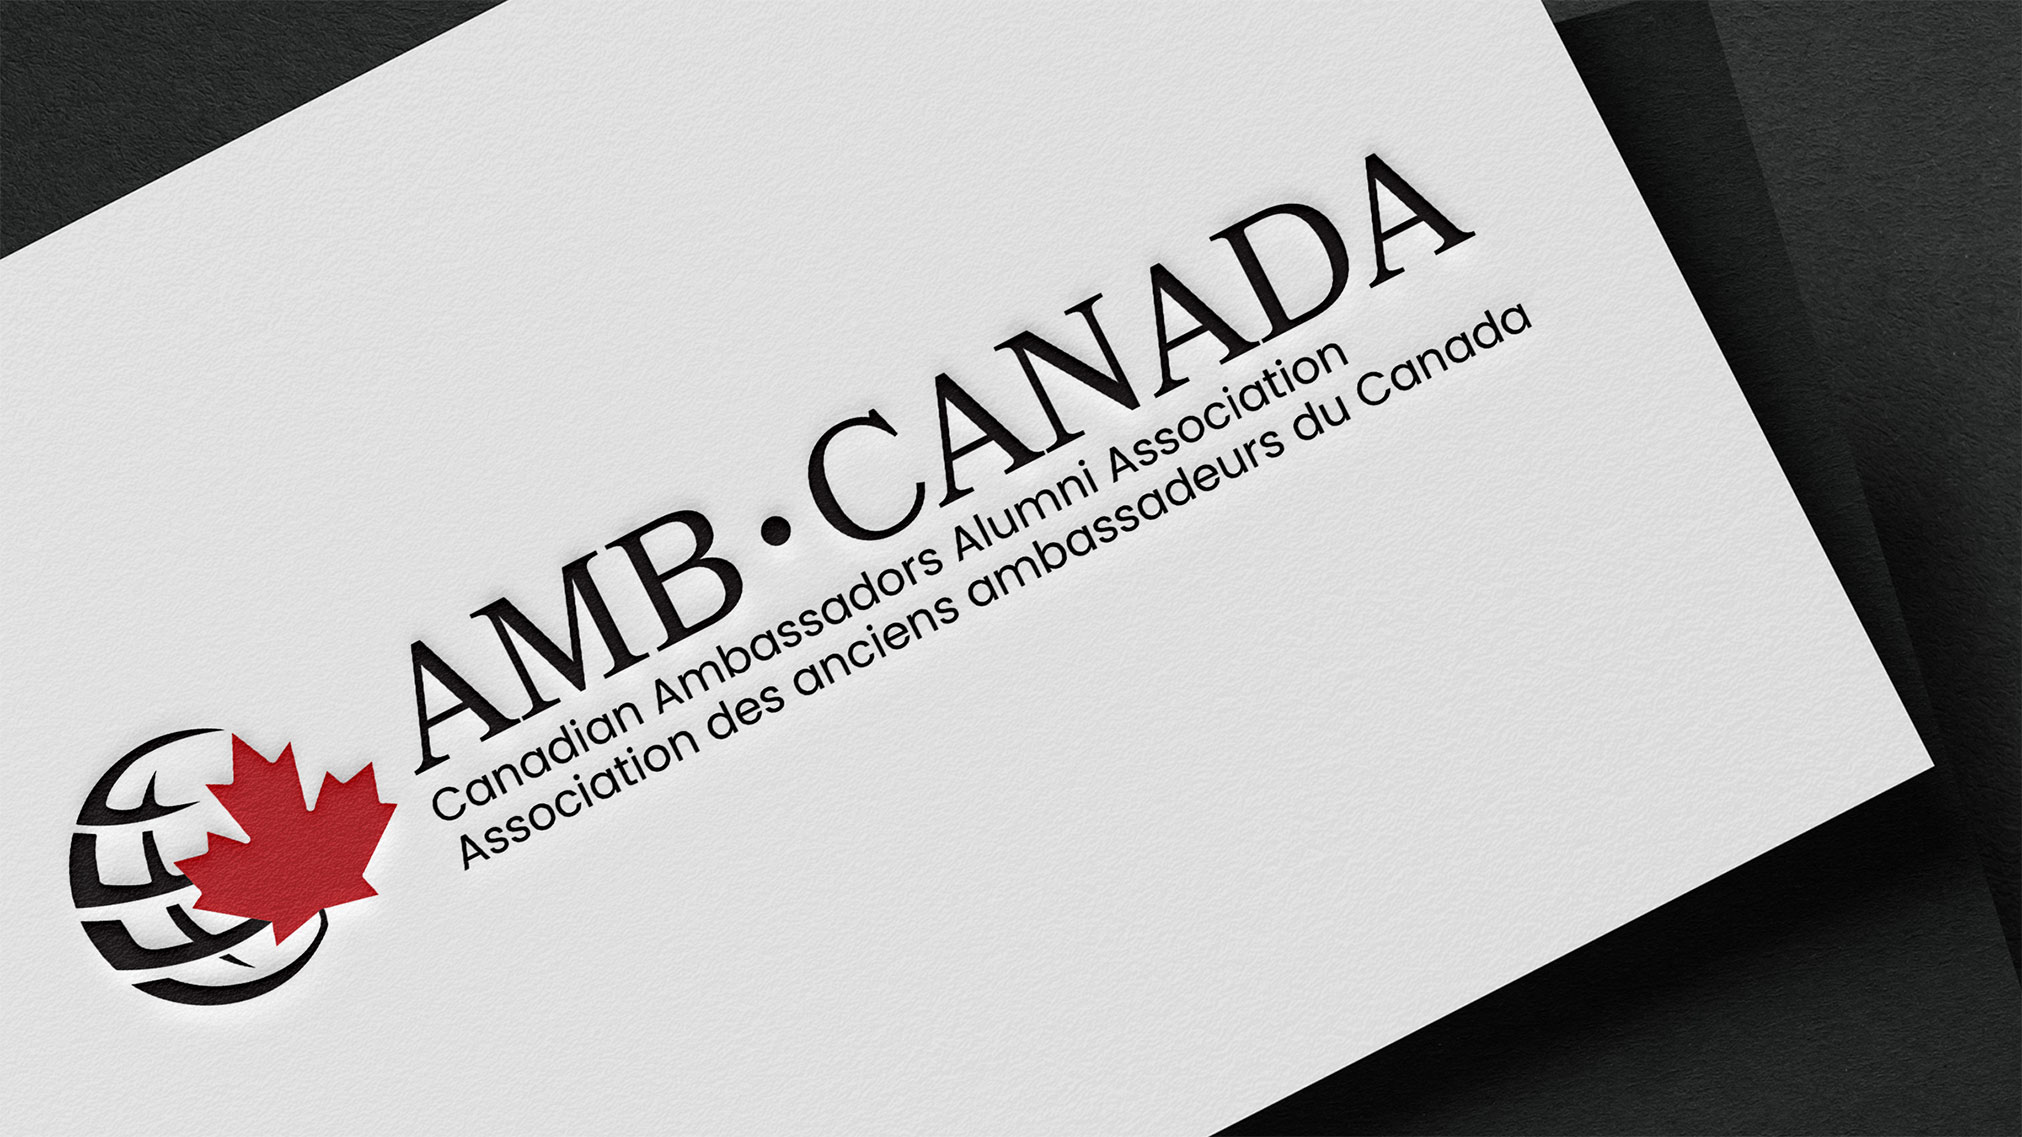 This logo was to represent a Canadian Diplomacy Organization that was going international. They asked for 3 signature icons in the logo: a maple leaf, a bridge and a globe. They wanted a modern and simple logo.
